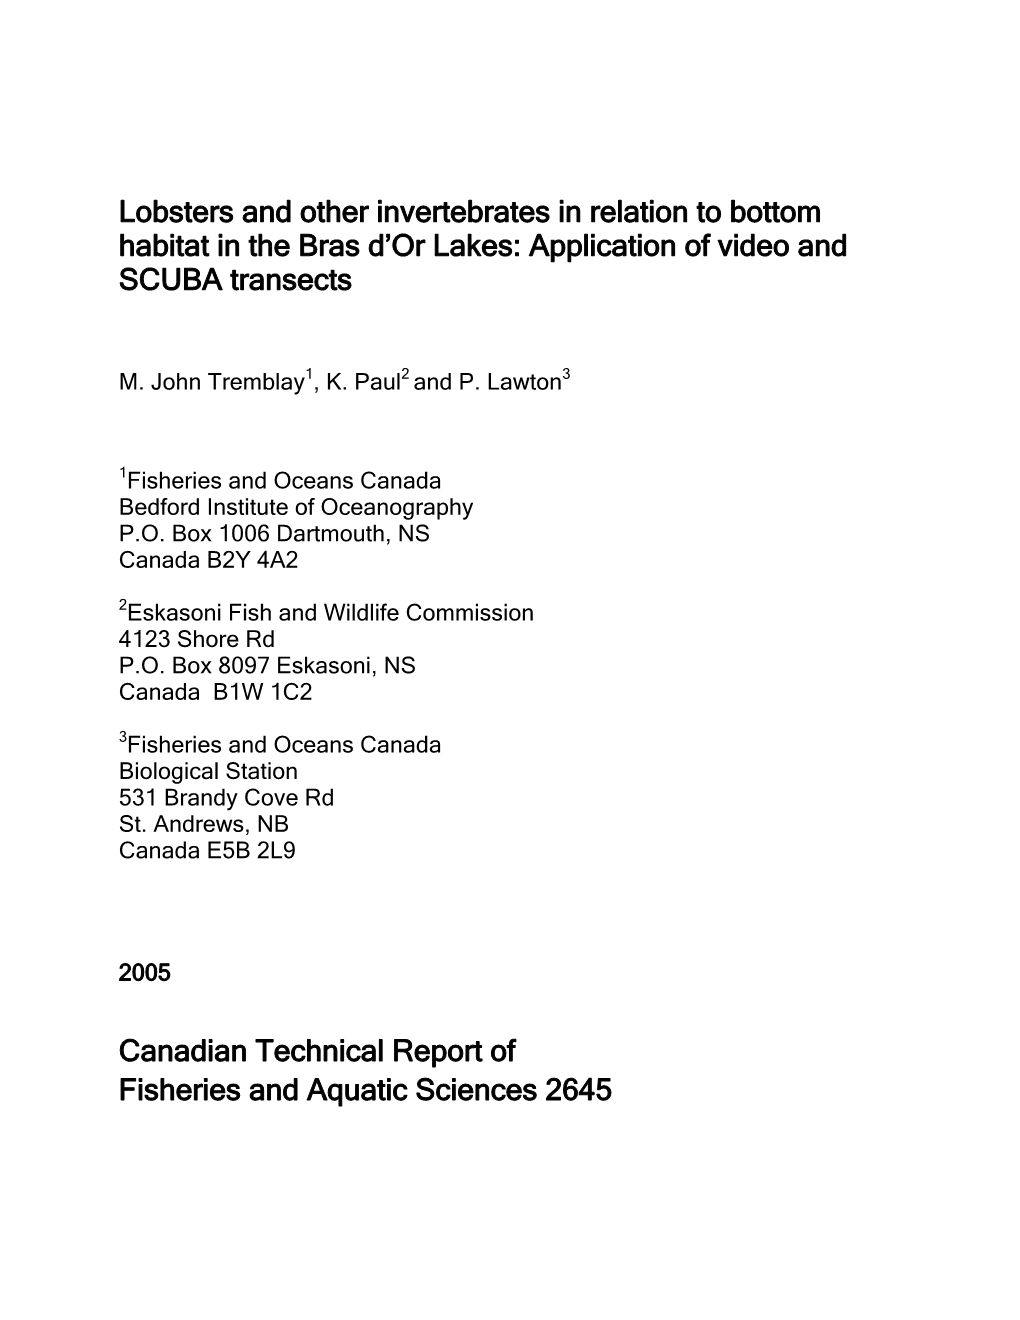 Lobsters and Other Invertebrates in Relation to Bottom Habitat in the Bras D’Or Lakes: Application of Video and SCUBA Transects